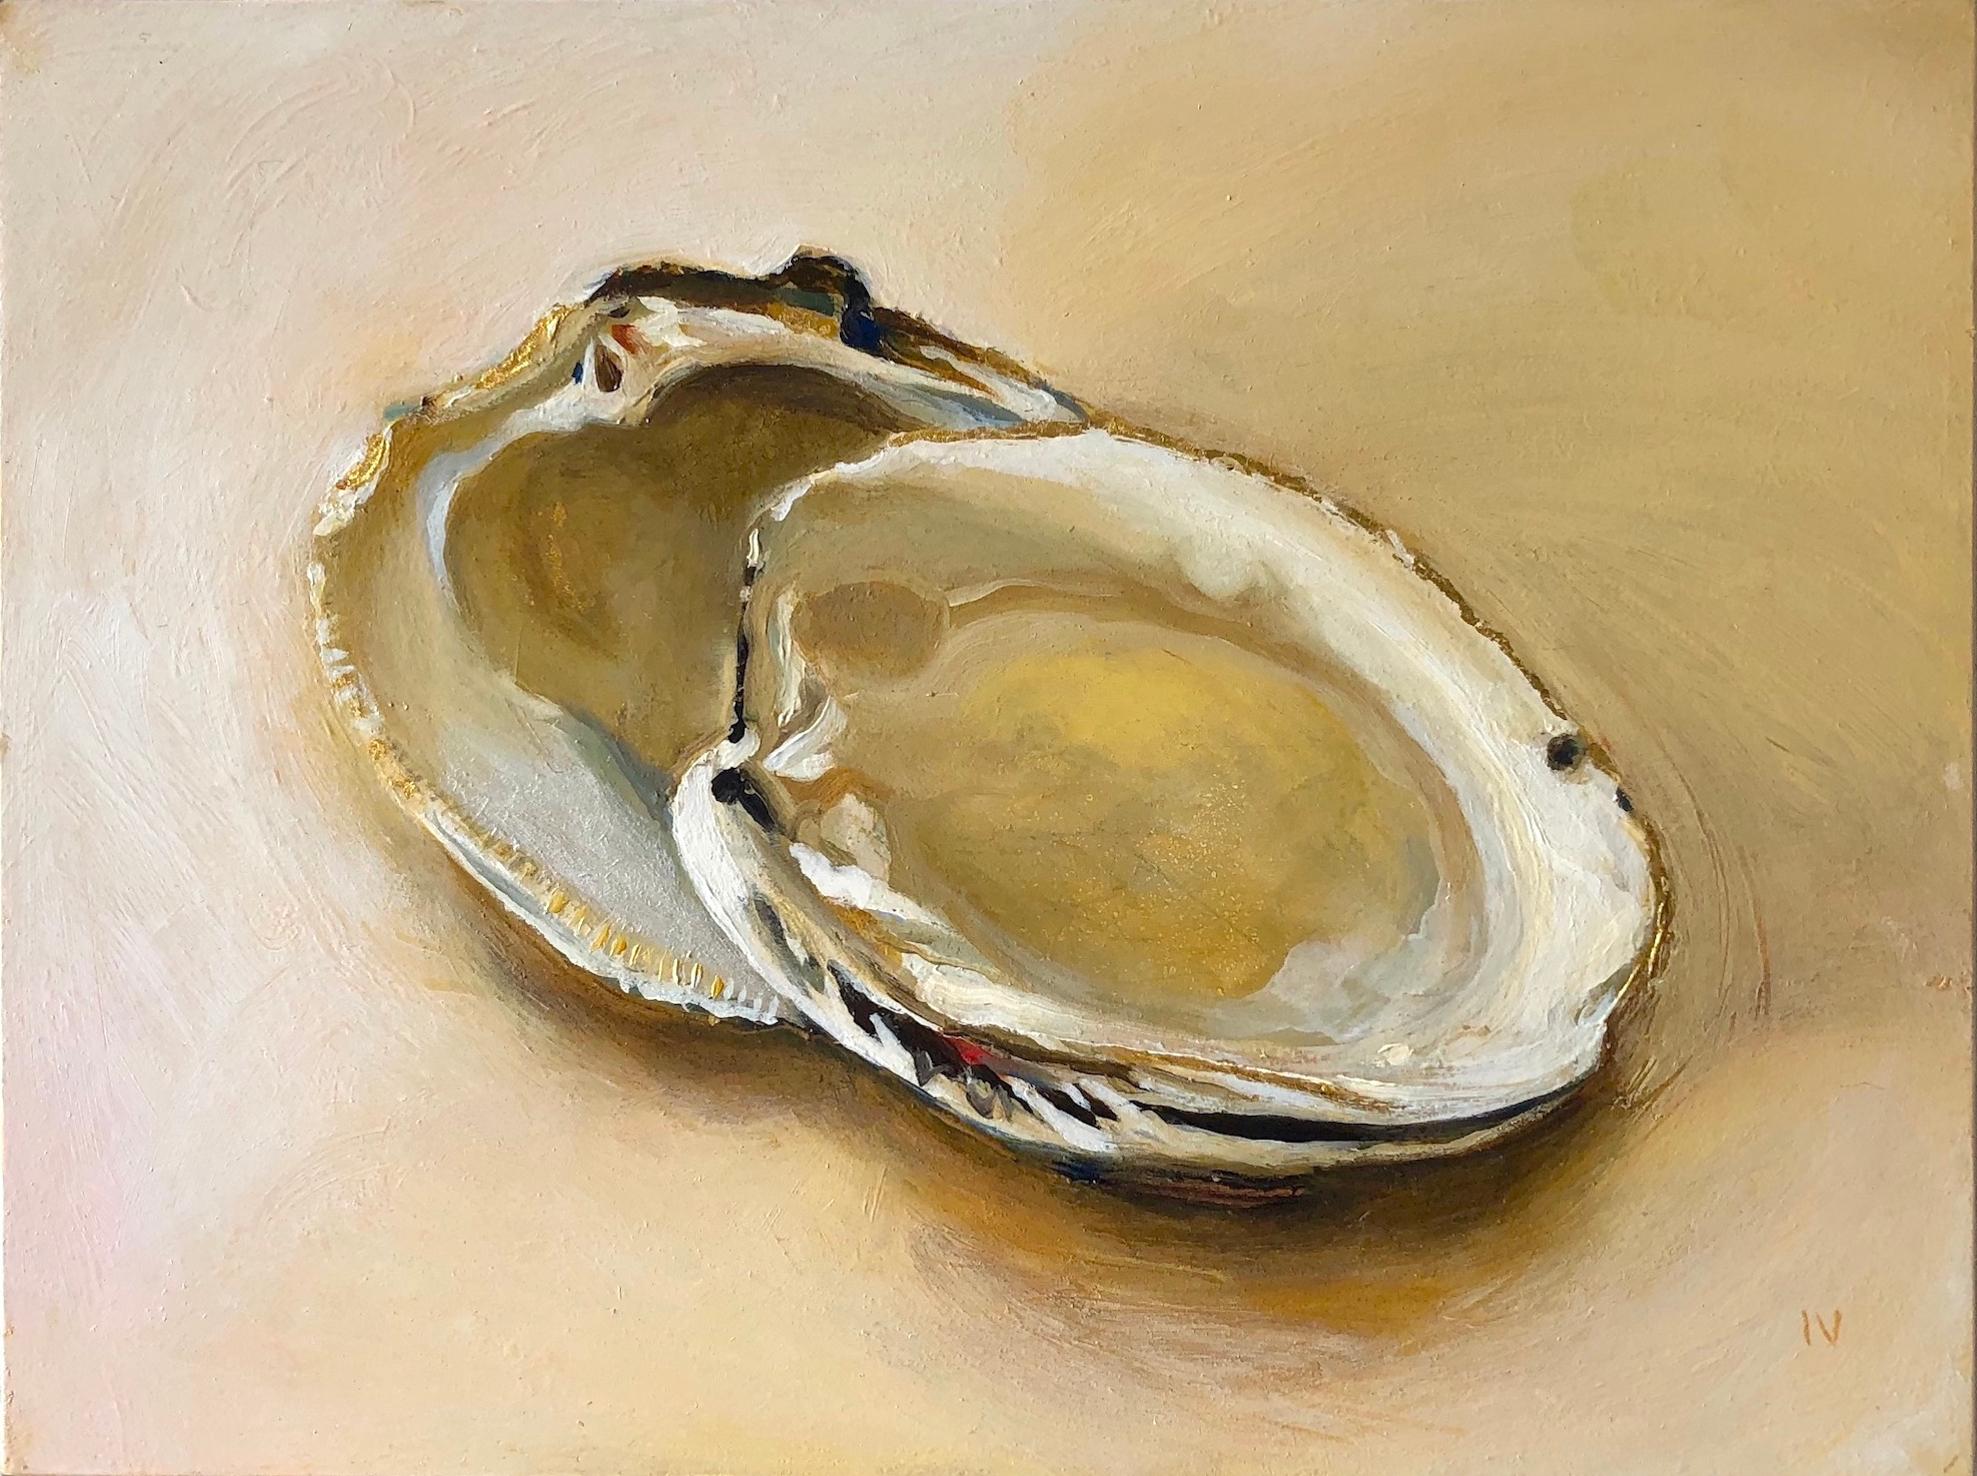 Clams #18 (Contemporary Realist Still Life Painting of Shells with Gold Leaf)